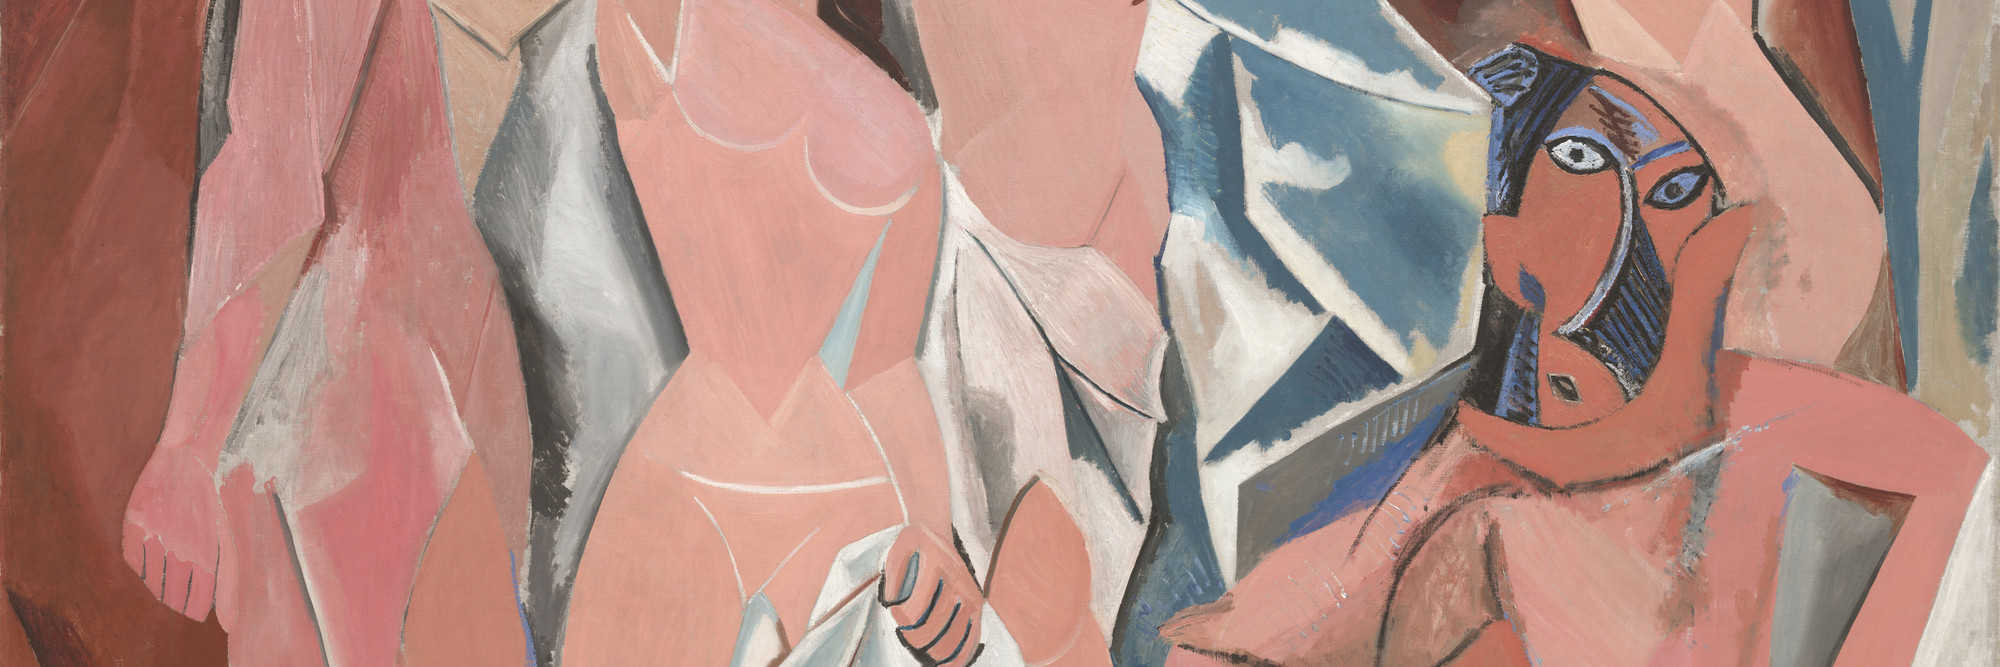 Pablo Picasso. Les Demoiselles d’Avignon. 1907. Oil on canvas, 8′ × 7′ 8″ (243.9 × 223.7 cm). The Museum of Modern Art, New York. Acquired through the Lillie P. Bliss Bequest. Photograph © 1997 The Museum of Modern Art, New York